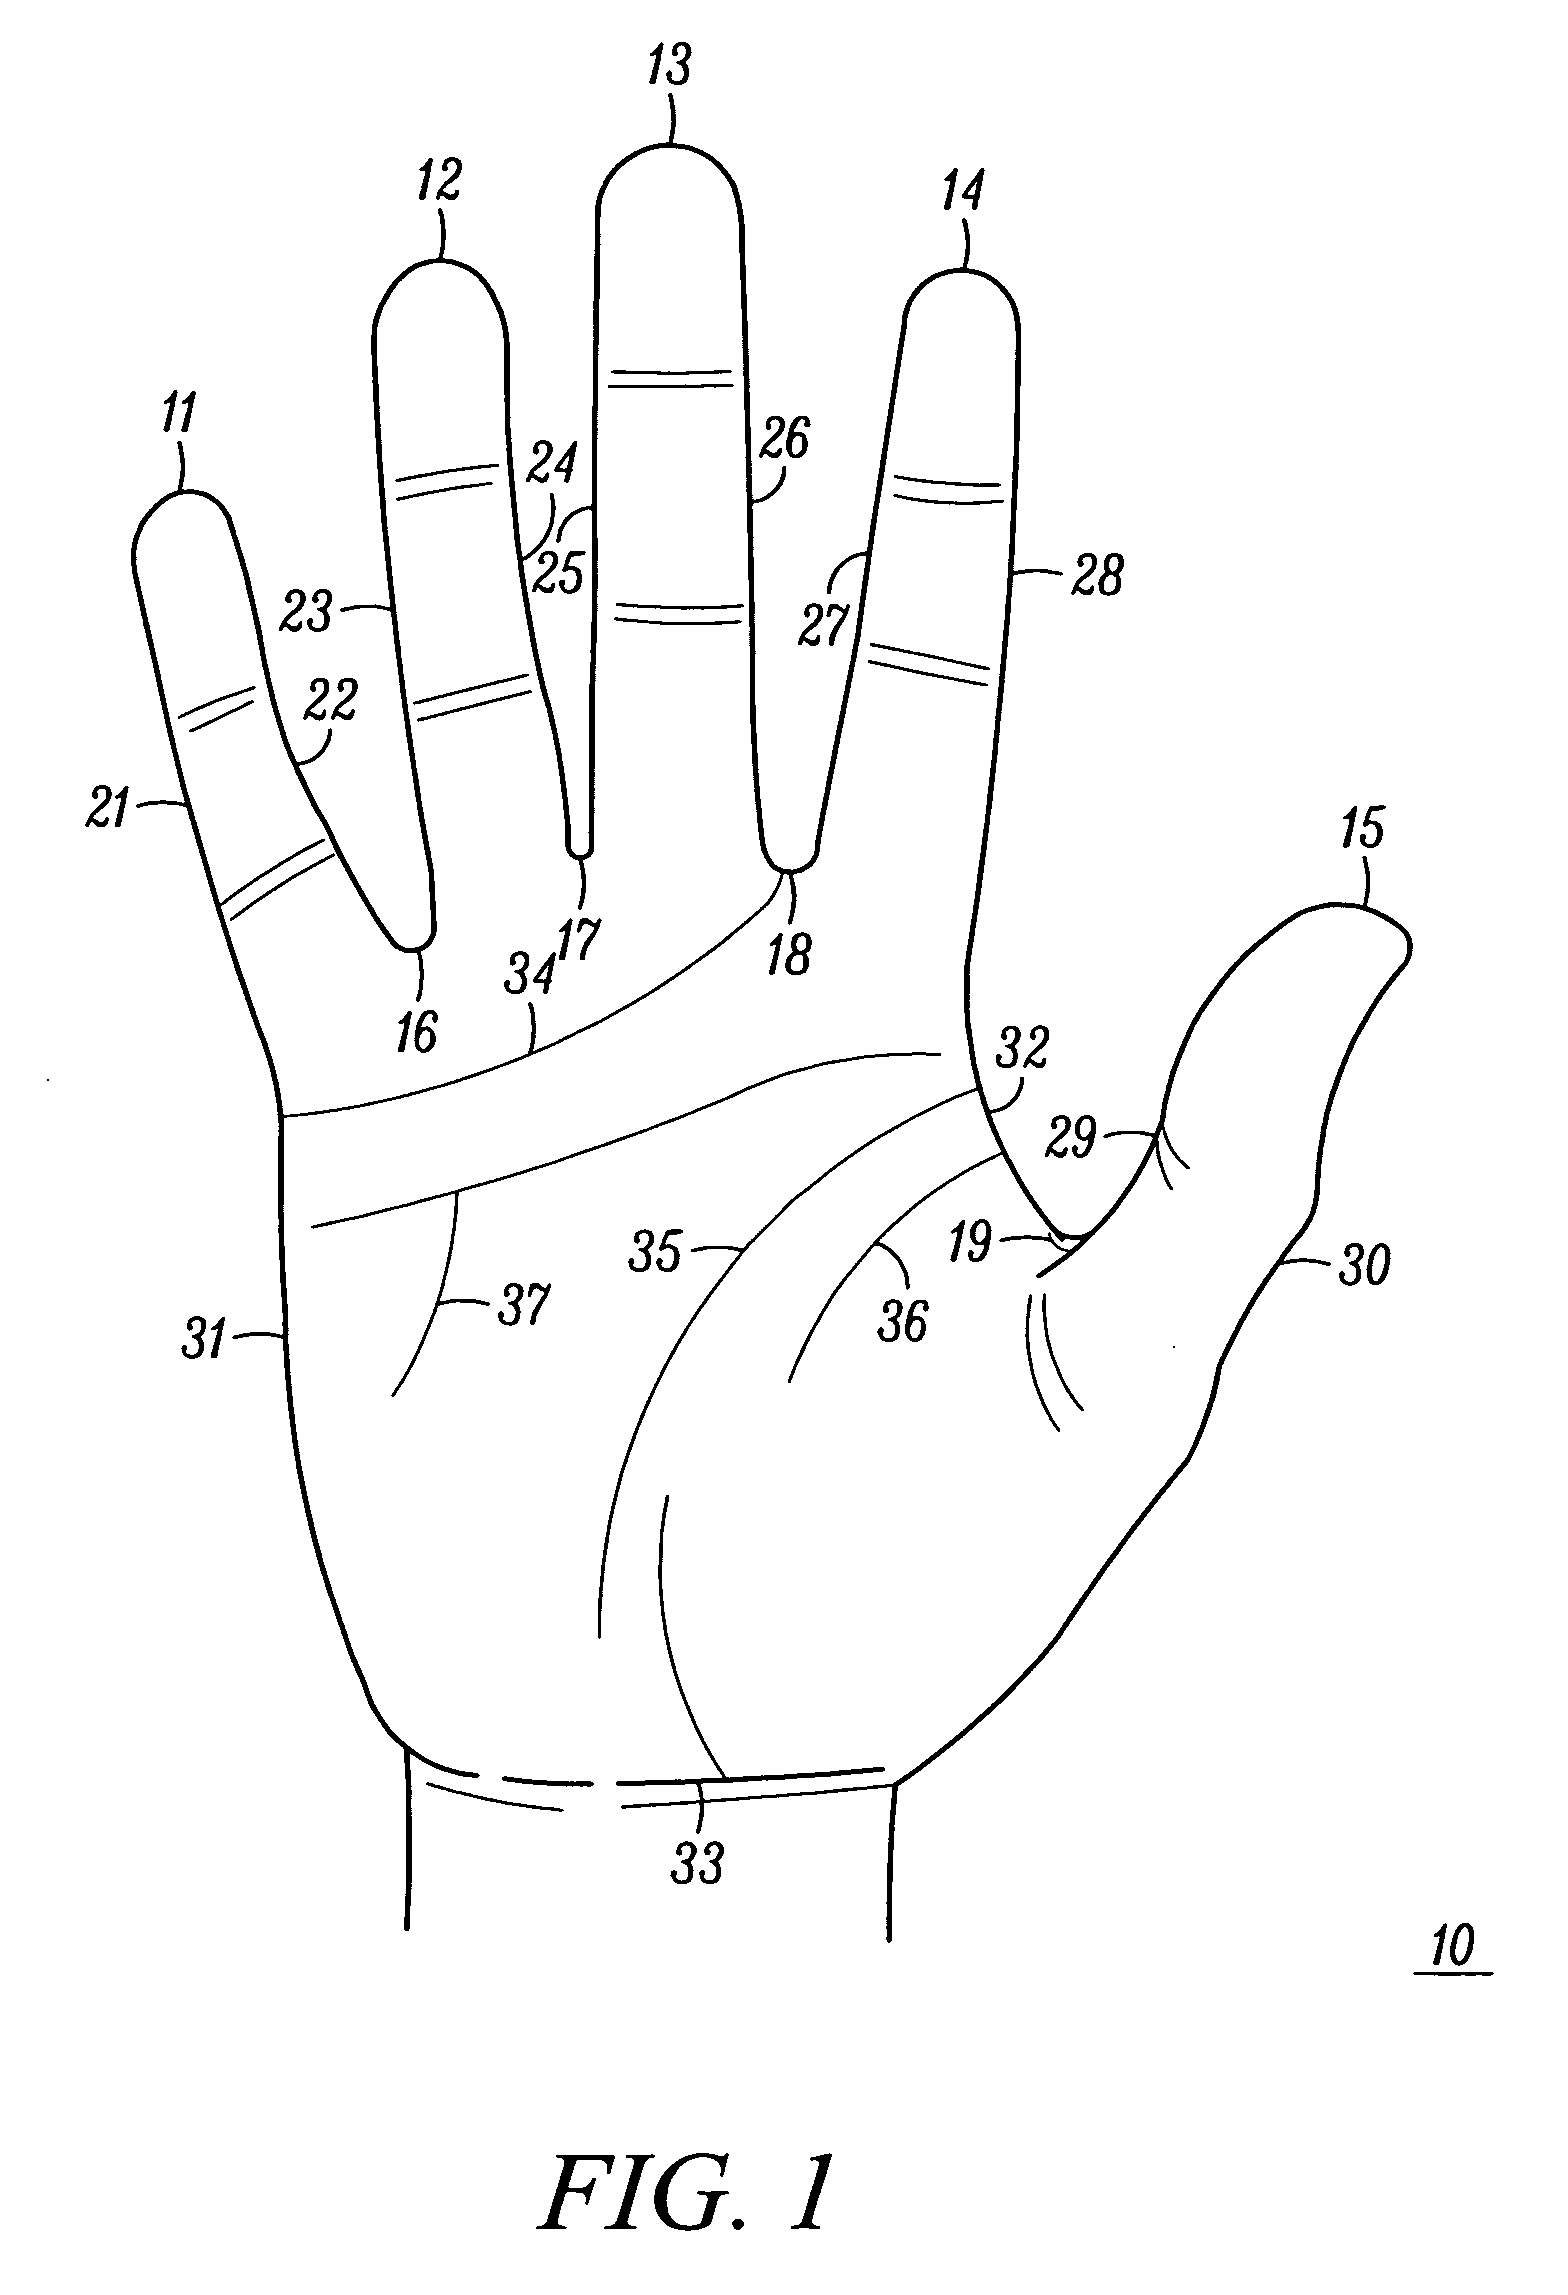 Recognition method using hand biometrics with anti-counterfeiting